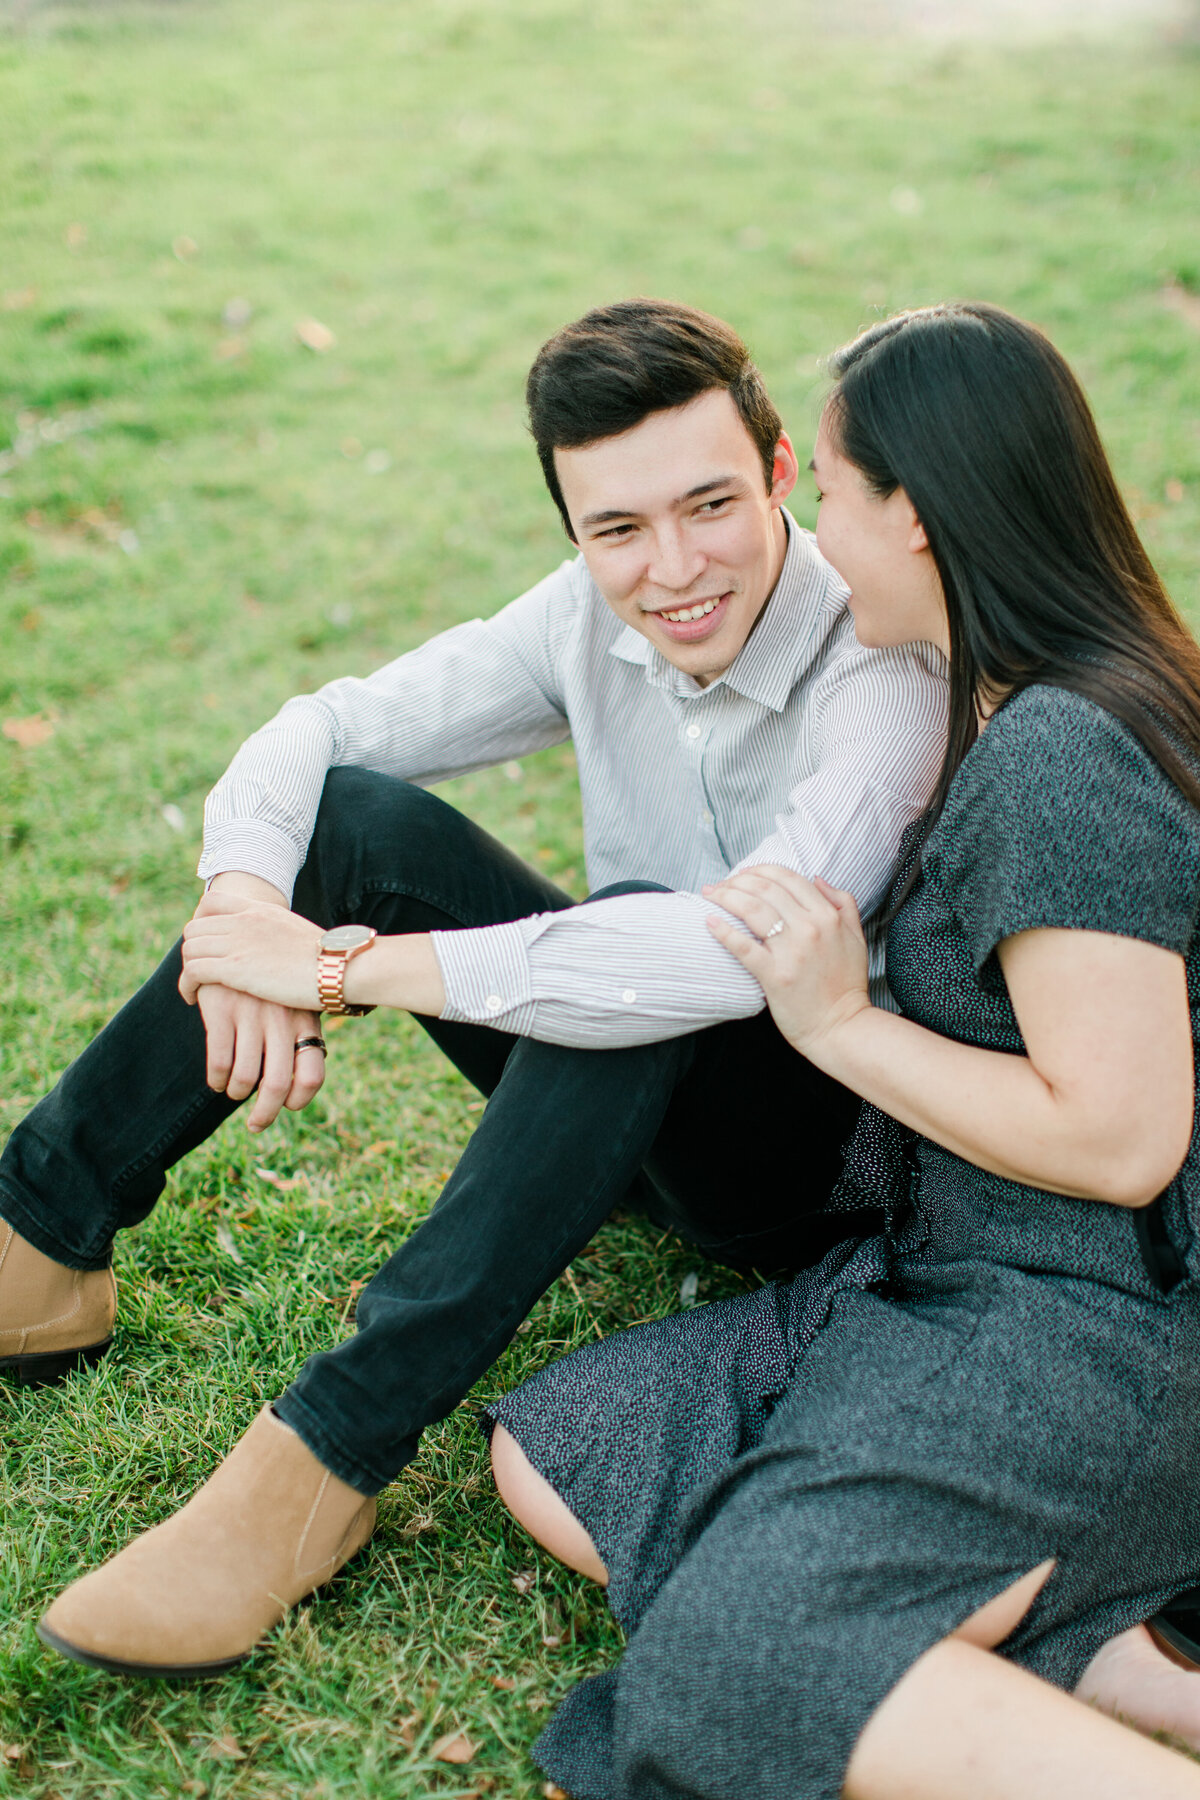 Becky_Collin_Navy_Yards_Park_The_Wharf_Washington_DC_Fall_Engagement_Session_AngelikaJohnsPhotography-7914